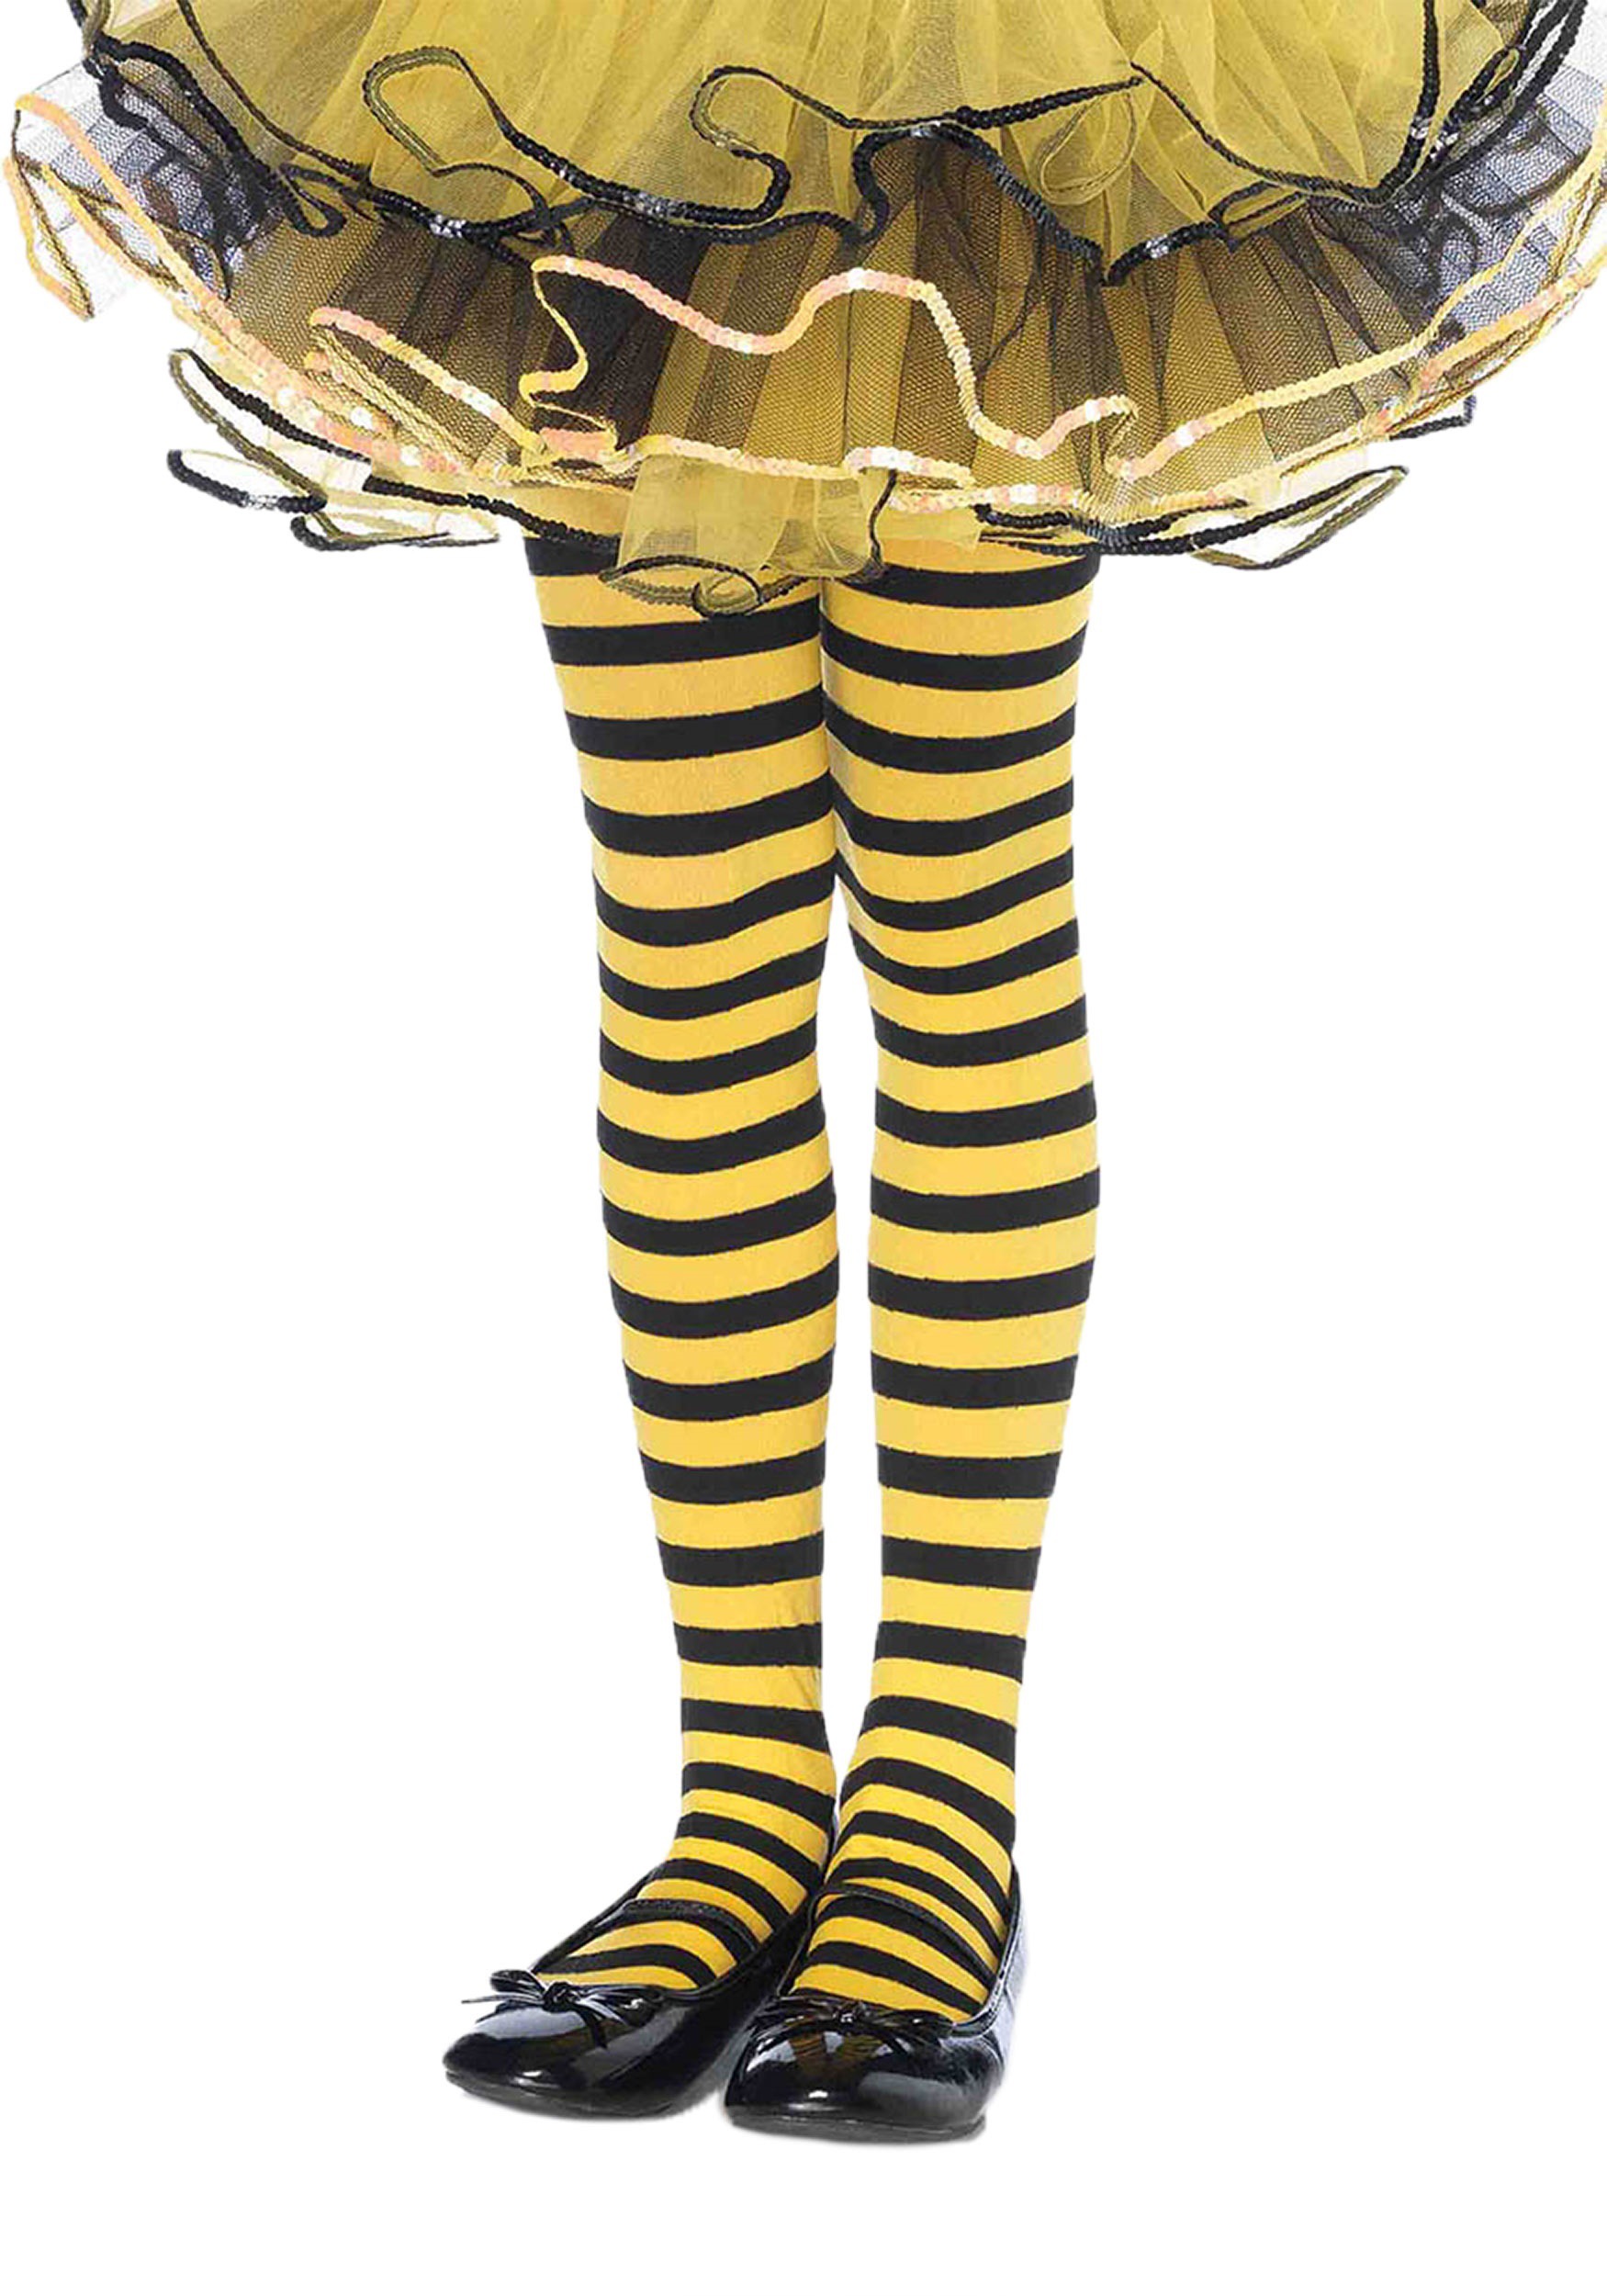 Bumblebee Tights Child Size 12 PACK 8005D - Private Island Party